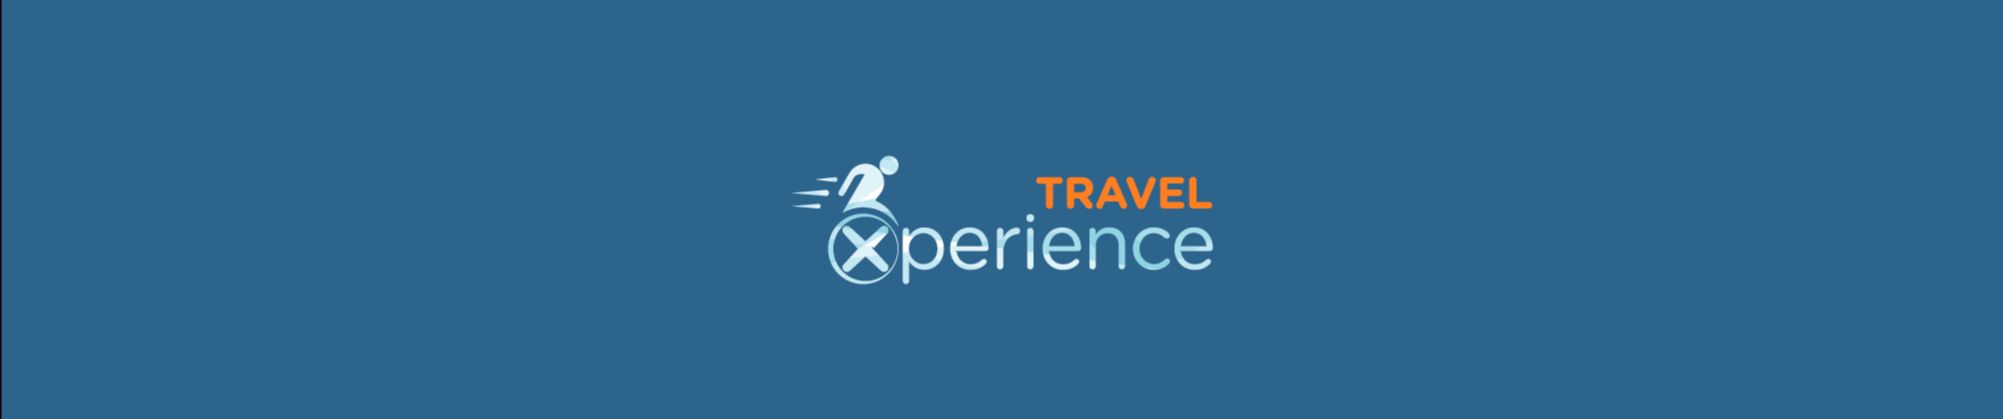 a blue background with the travel acceptance logo